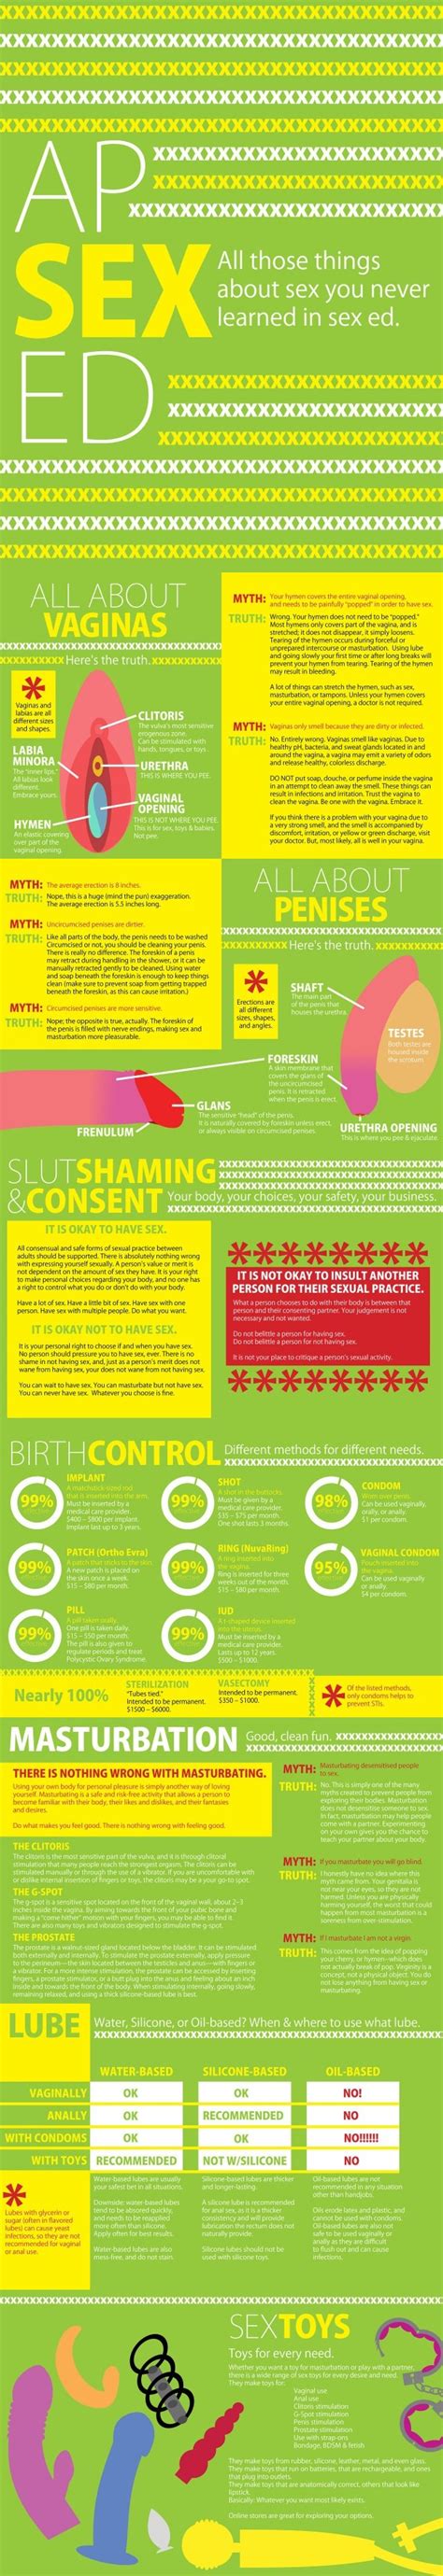 Topics You Never Learnt In Sex Education Class Infographic